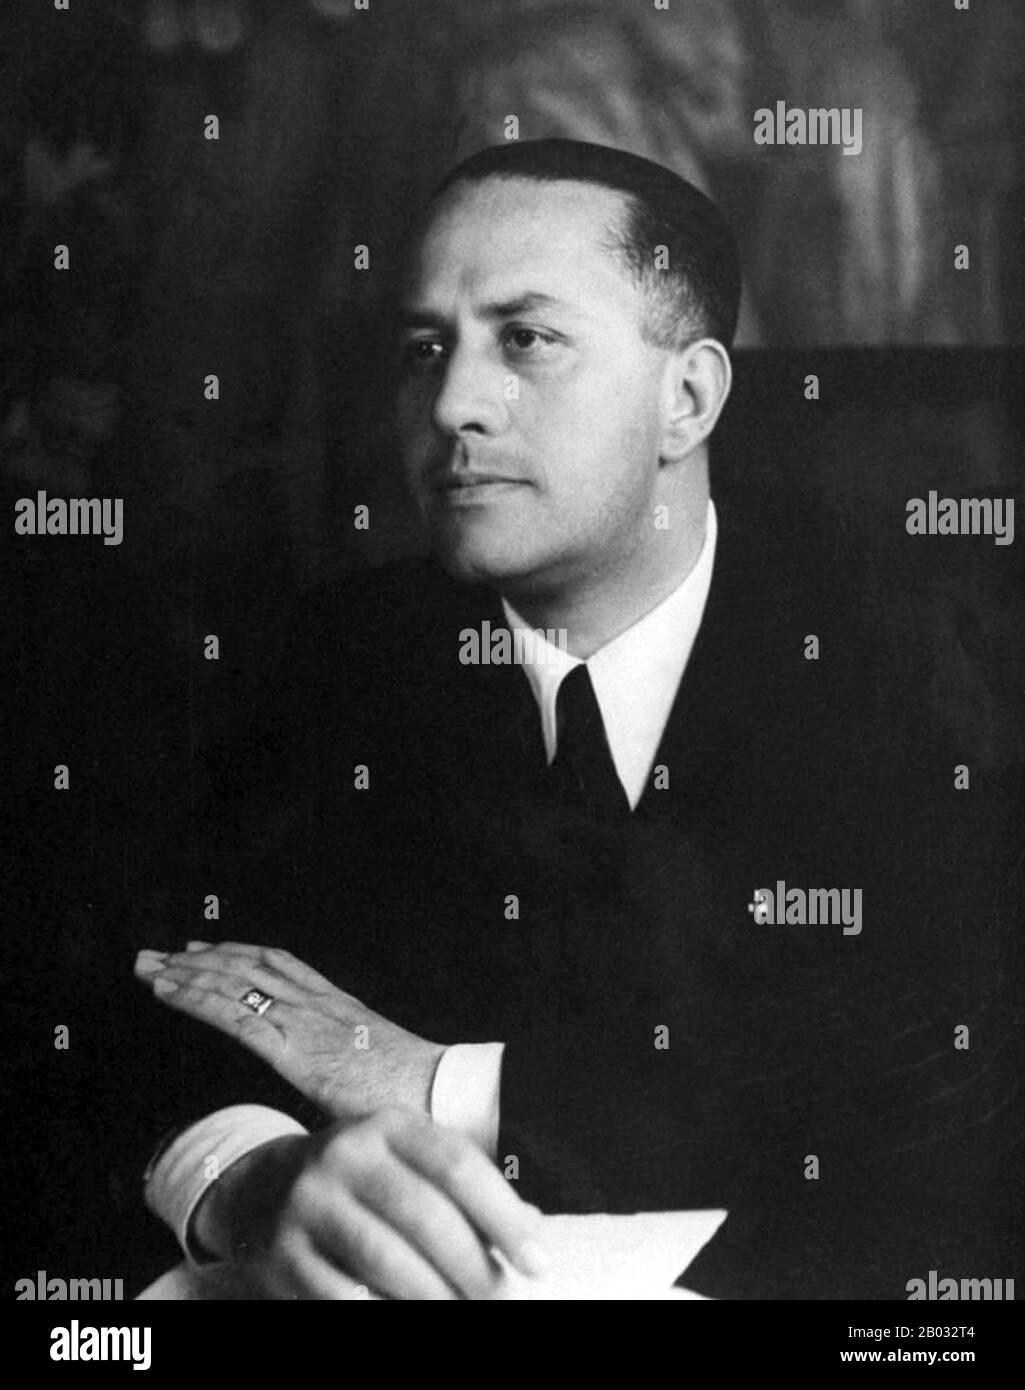 Gian Galeazzo Ciano, 2nd Count of Cortellazzo and Buccari (18 March 1903 – 11 January 1944) was Foreign Minister of Fascist Italy from 1936 until 1943 and Benito Mussolini's son-in-law. On 11 January 1944, Count Ciano was shot by firing squad at the behest of his father-in-law, Mussolini, under pressure from Nazi Germany.  Ciano wrote and left behind a diary that has been used as a source by several historians, including William Shirer in his The Rise and Fall of the Third Reich. Stock Photo